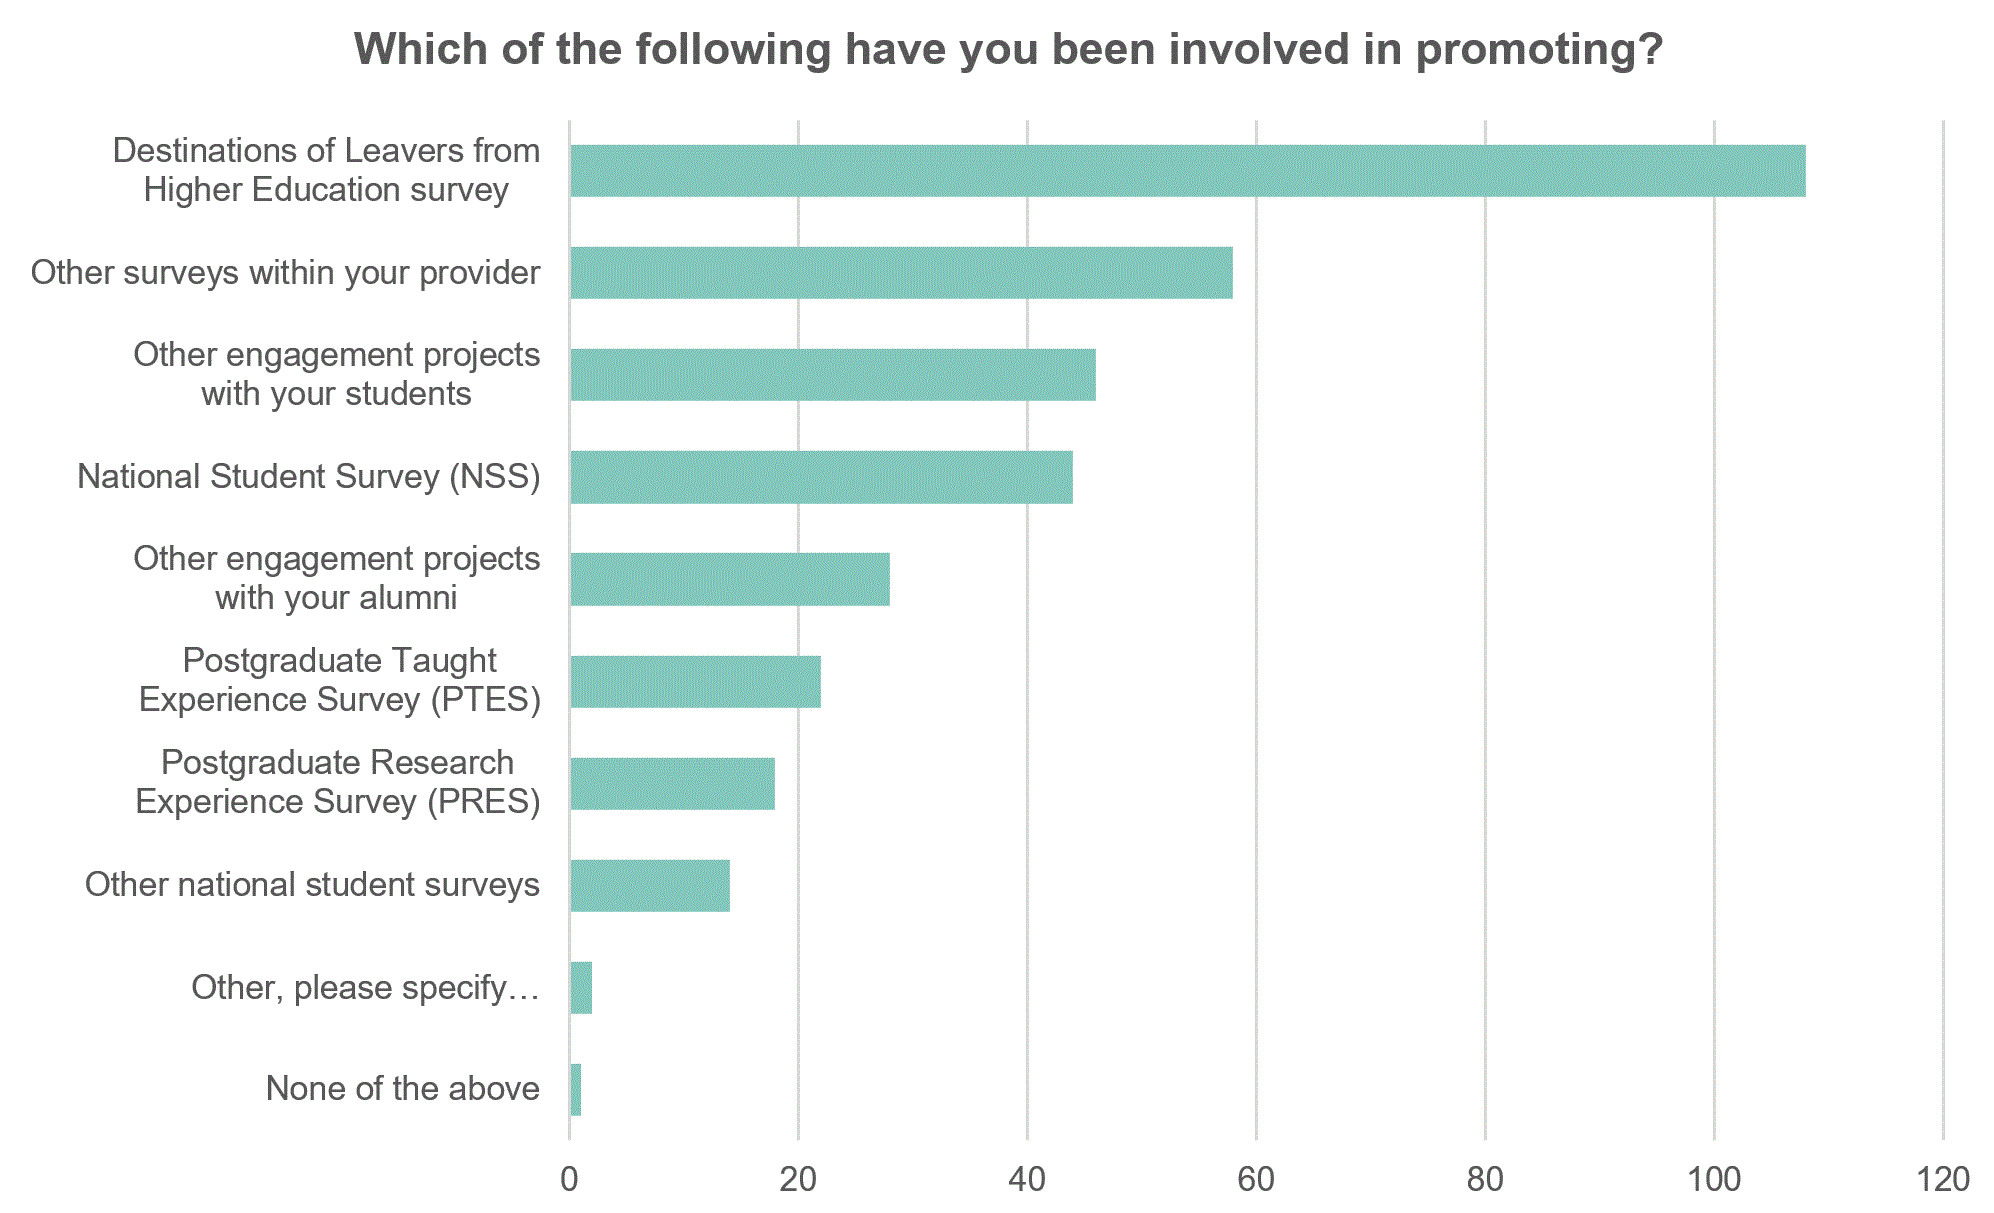 Chart 1 - Which of the following have you been involved in promoting?